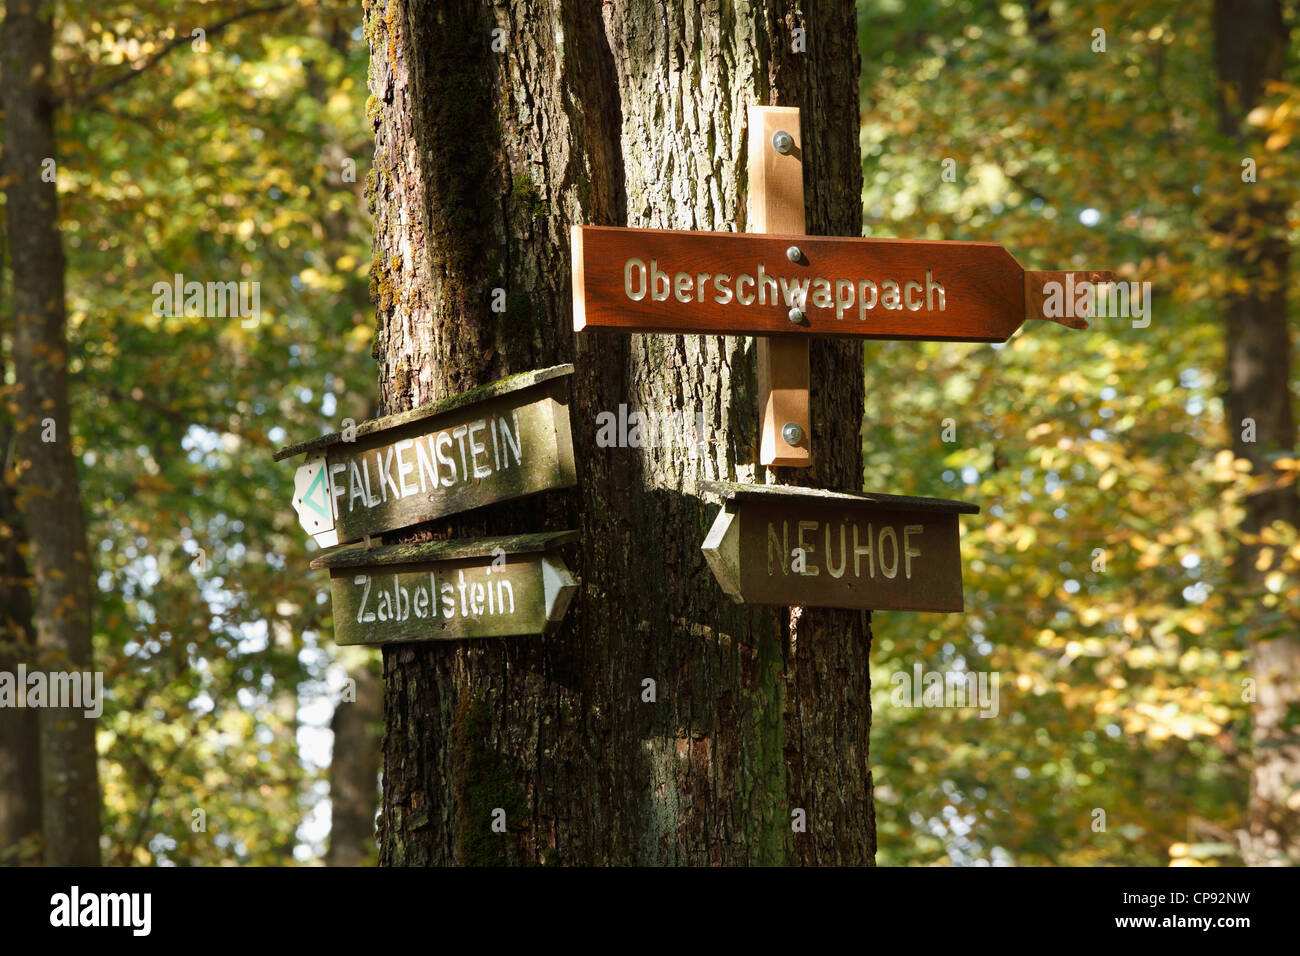 Germany, Bavaria, Signposts in forest Stock Photo